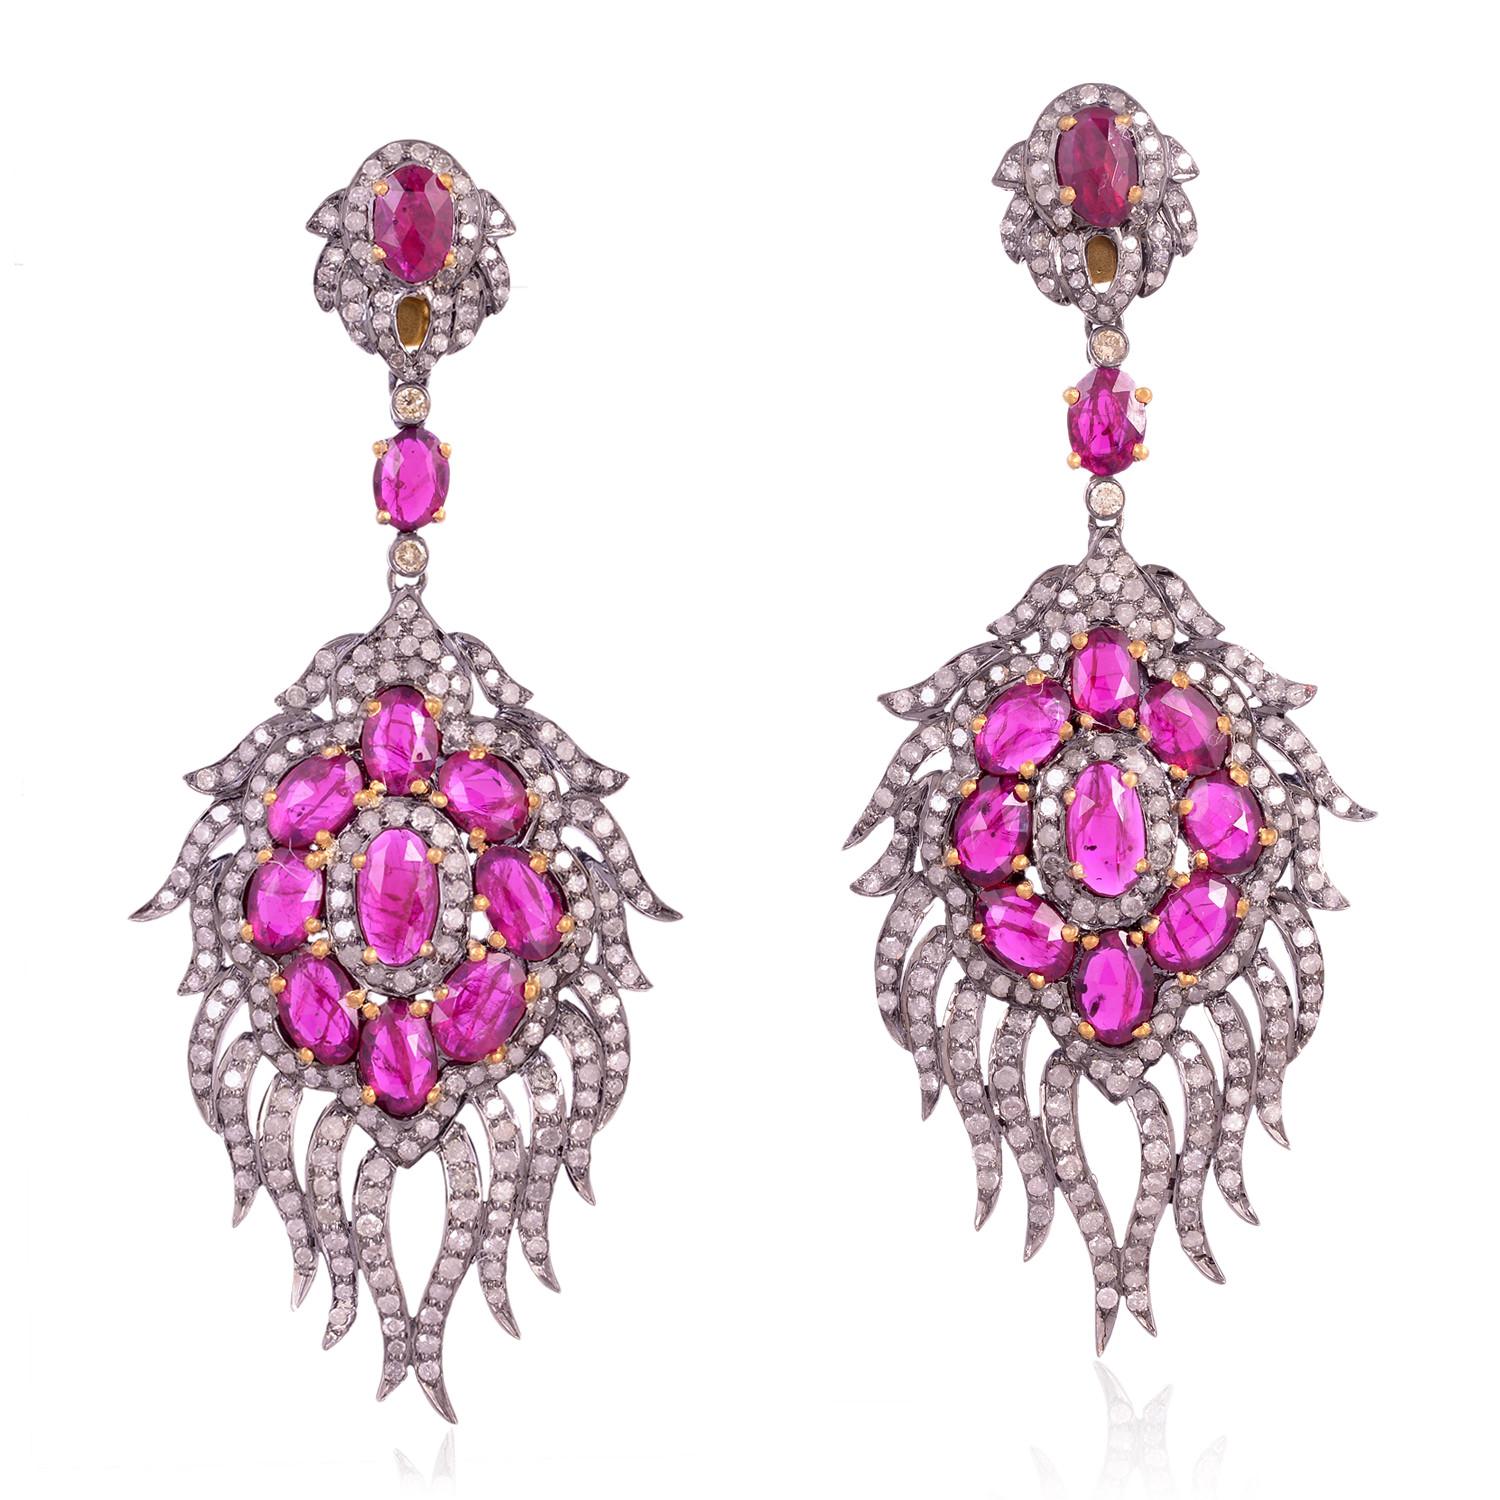 Mixed Cut Rose Cut Ruby Dangle Earrings with Pave Diamonds Made in 18k Gold & Silver For Sale